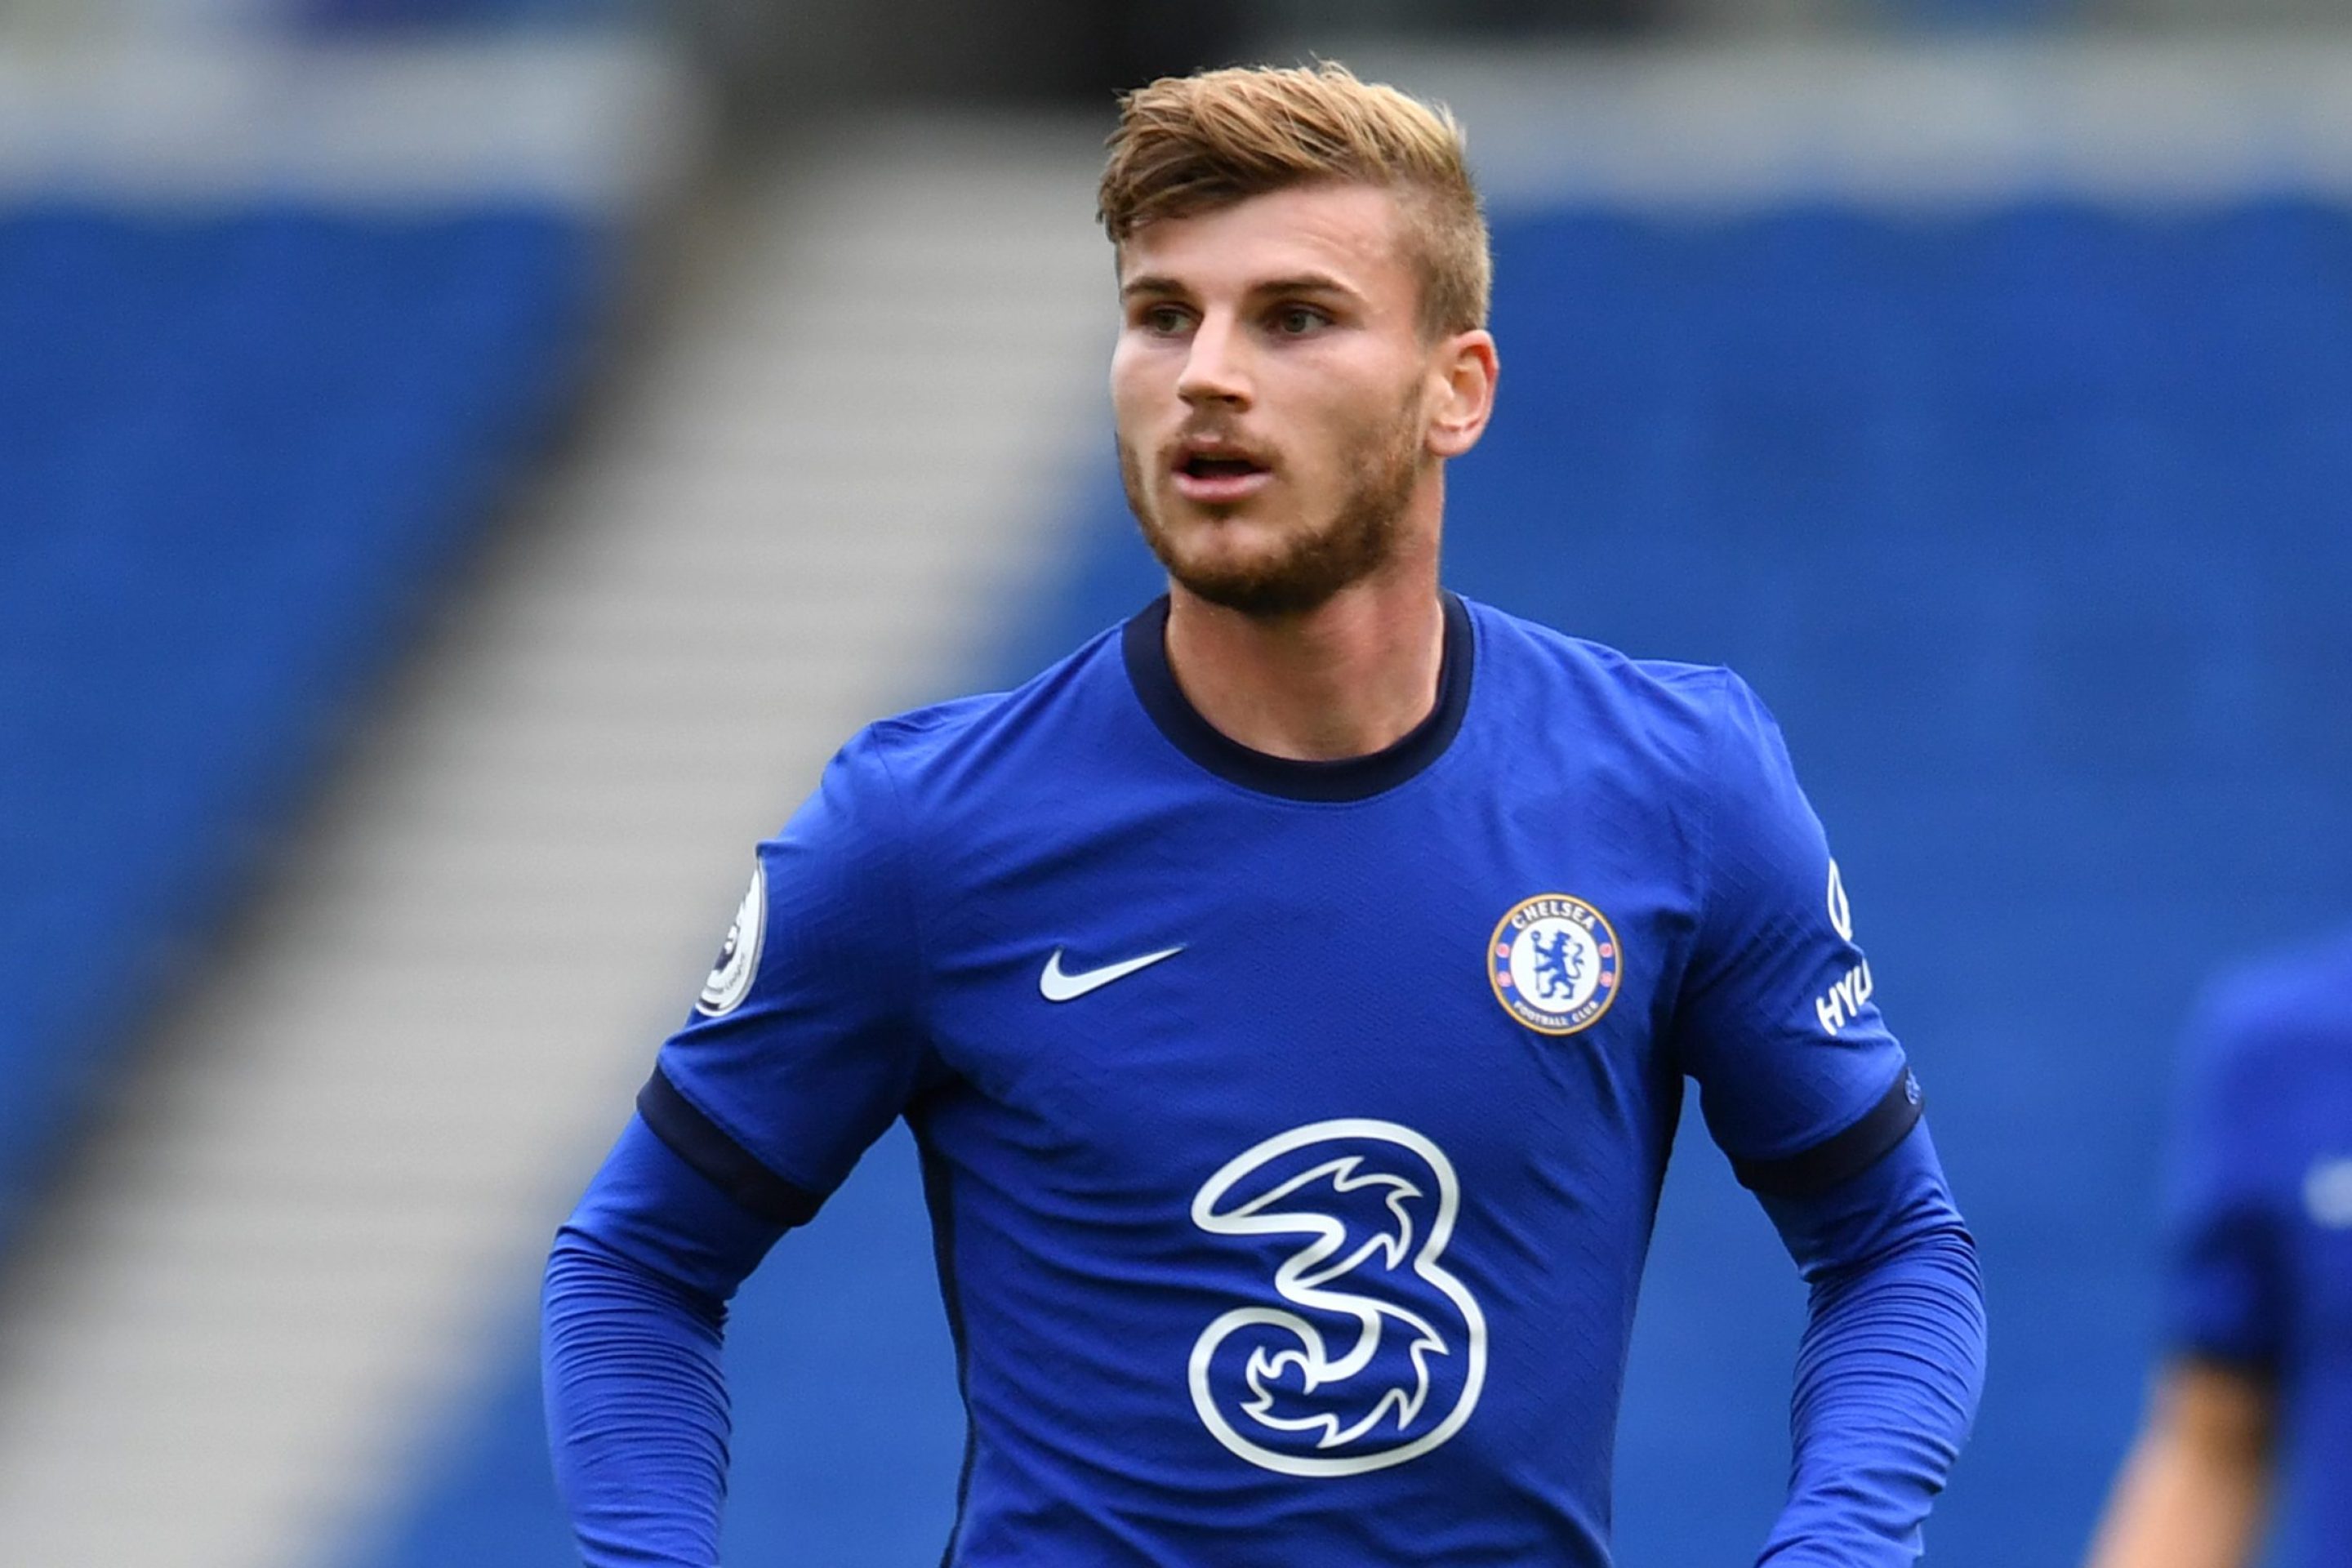 Timo Werner running during a Chelsea game